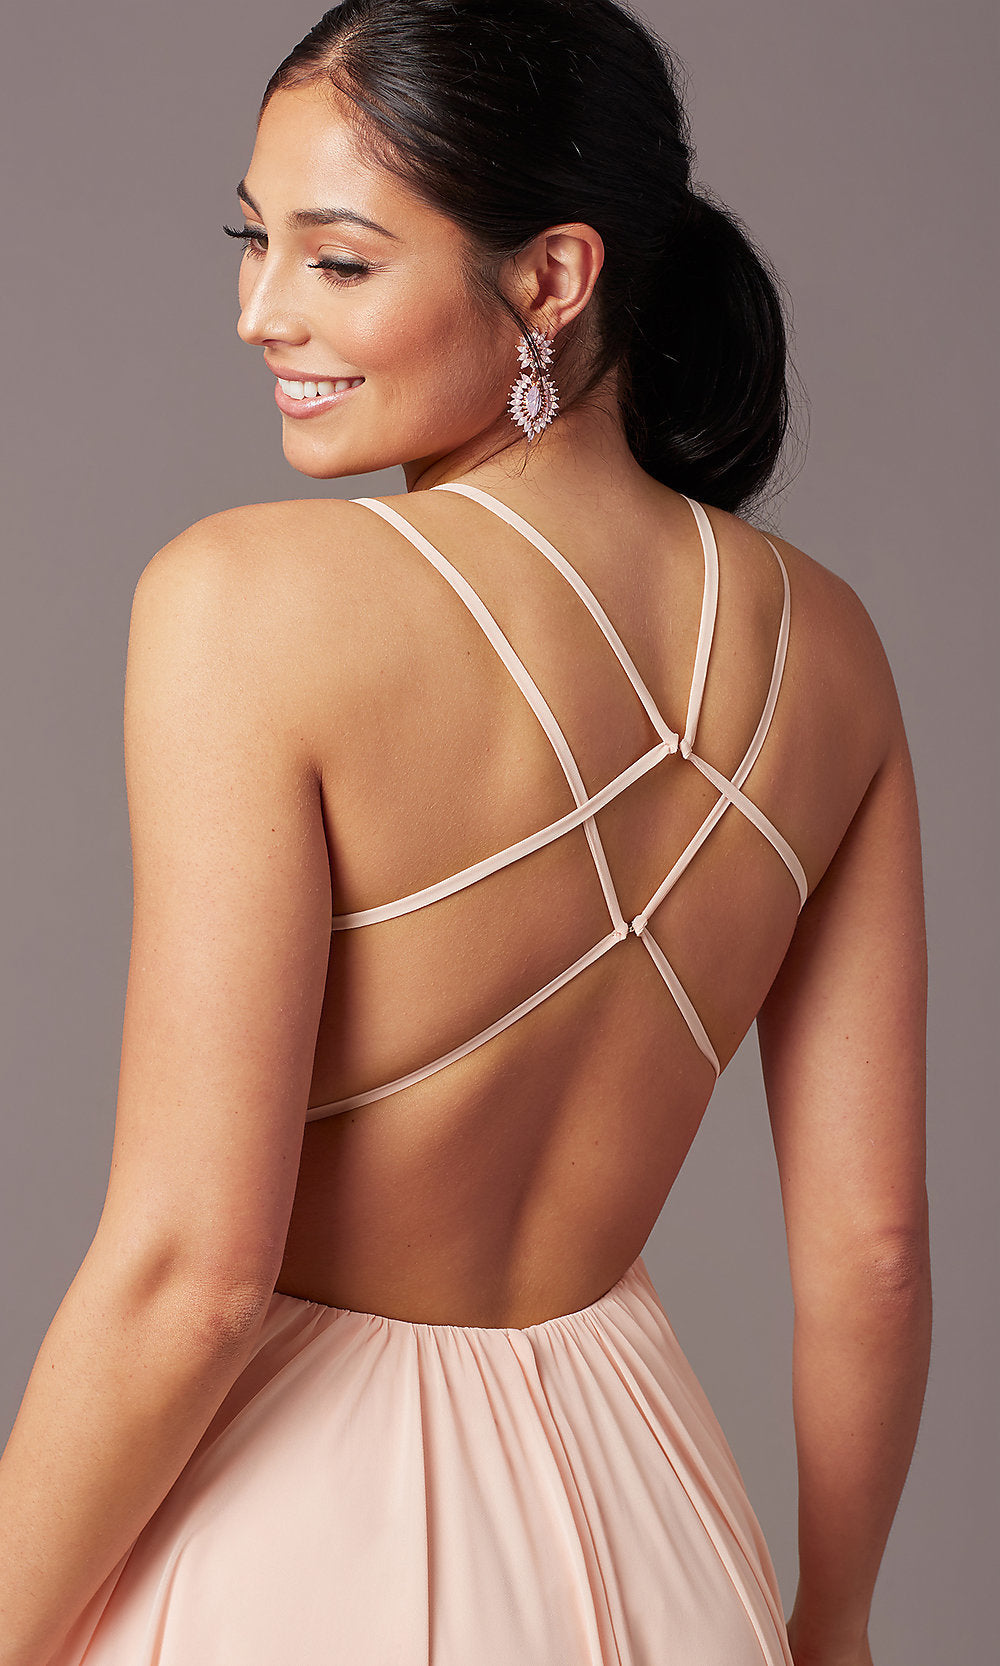  Backless Long Formal Prom Dress by PromGirl